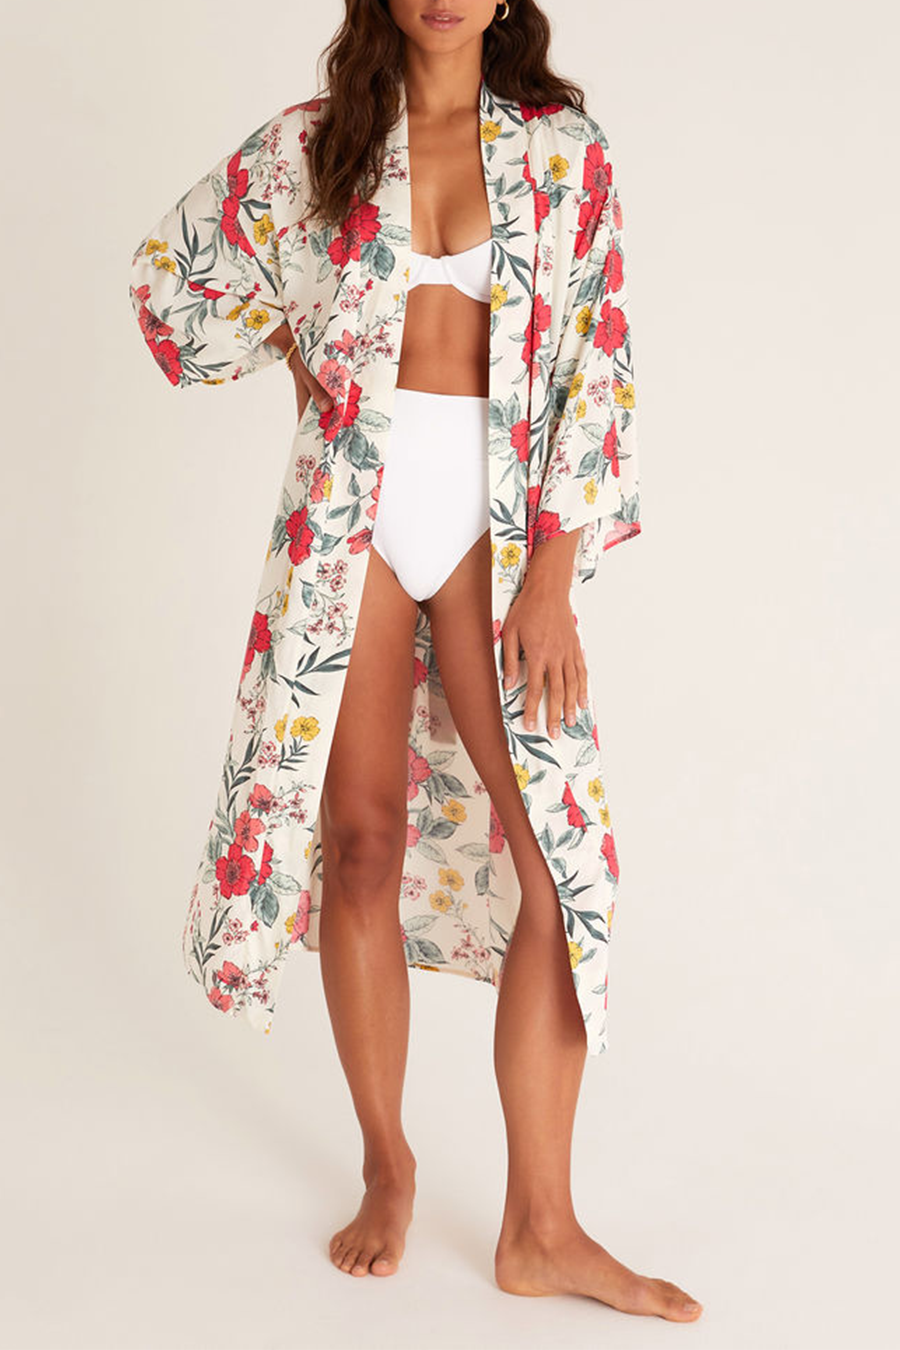 Bed To Beach Floral Kimono | White Sand - Main Image Number 1 of 1